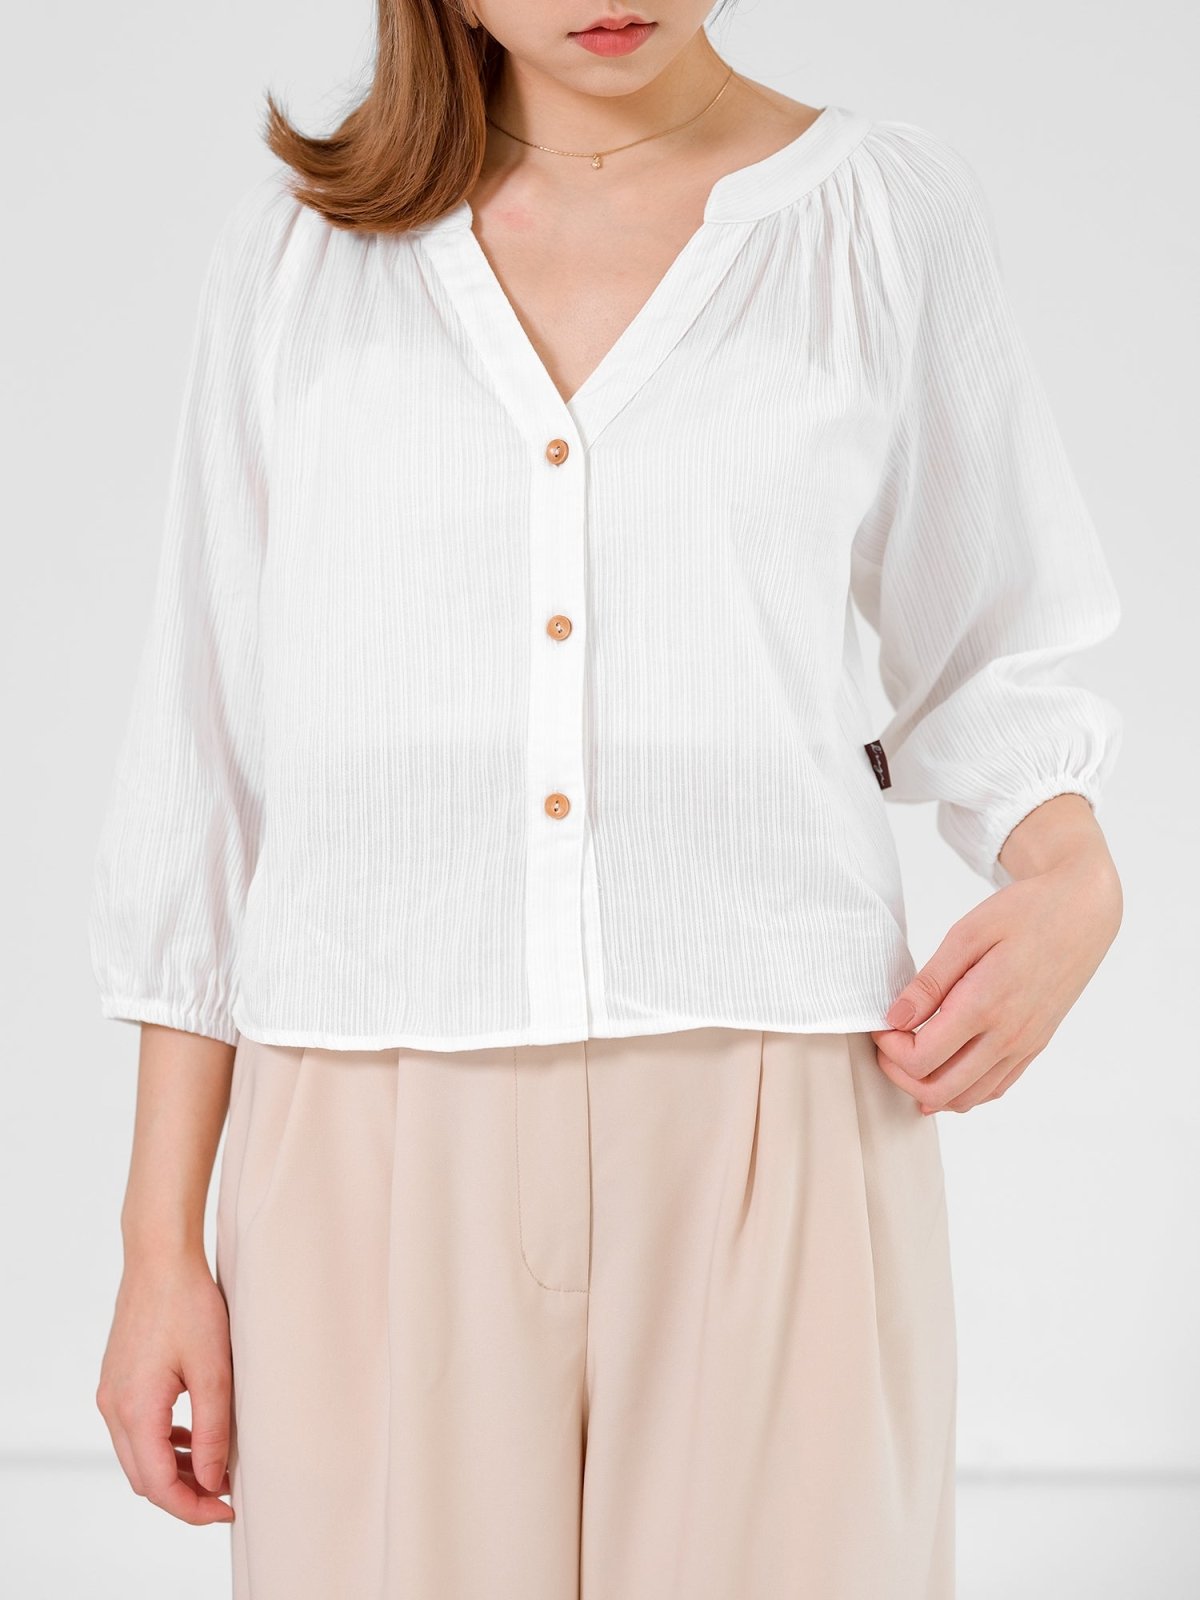 Casey Summer Button Down Notch Neck Blouse - DAG-DD9504-22WhiteF - Ivory Patterned - F - D'ZAGE Designs